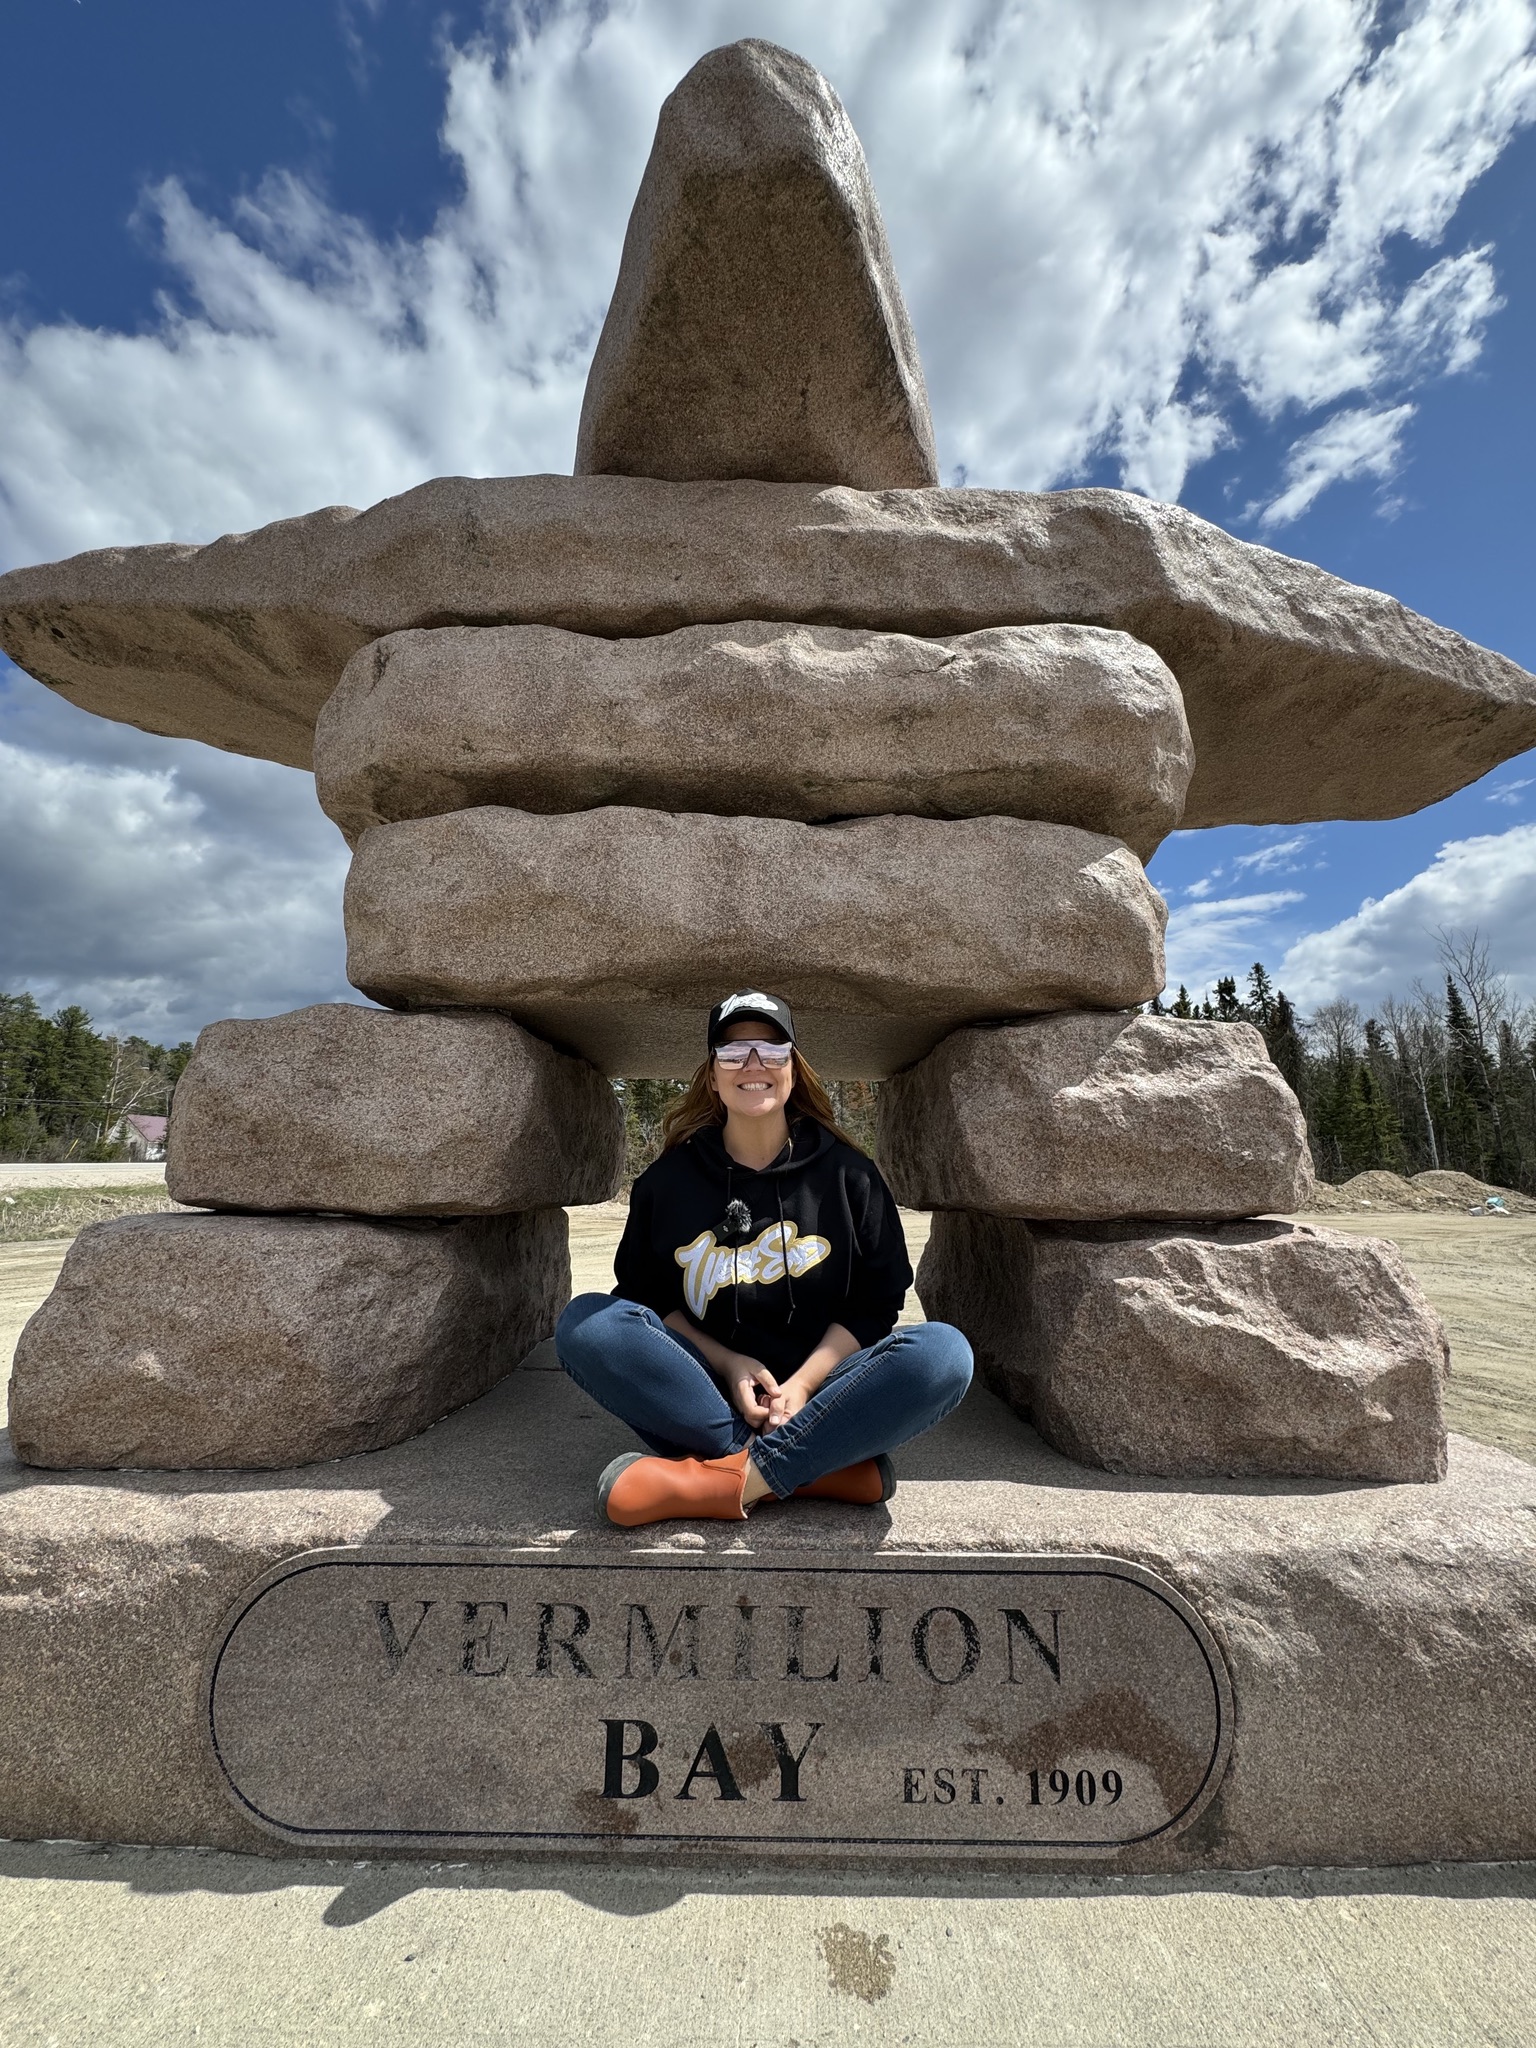 Must Dos and Sees in Vermilion Bay